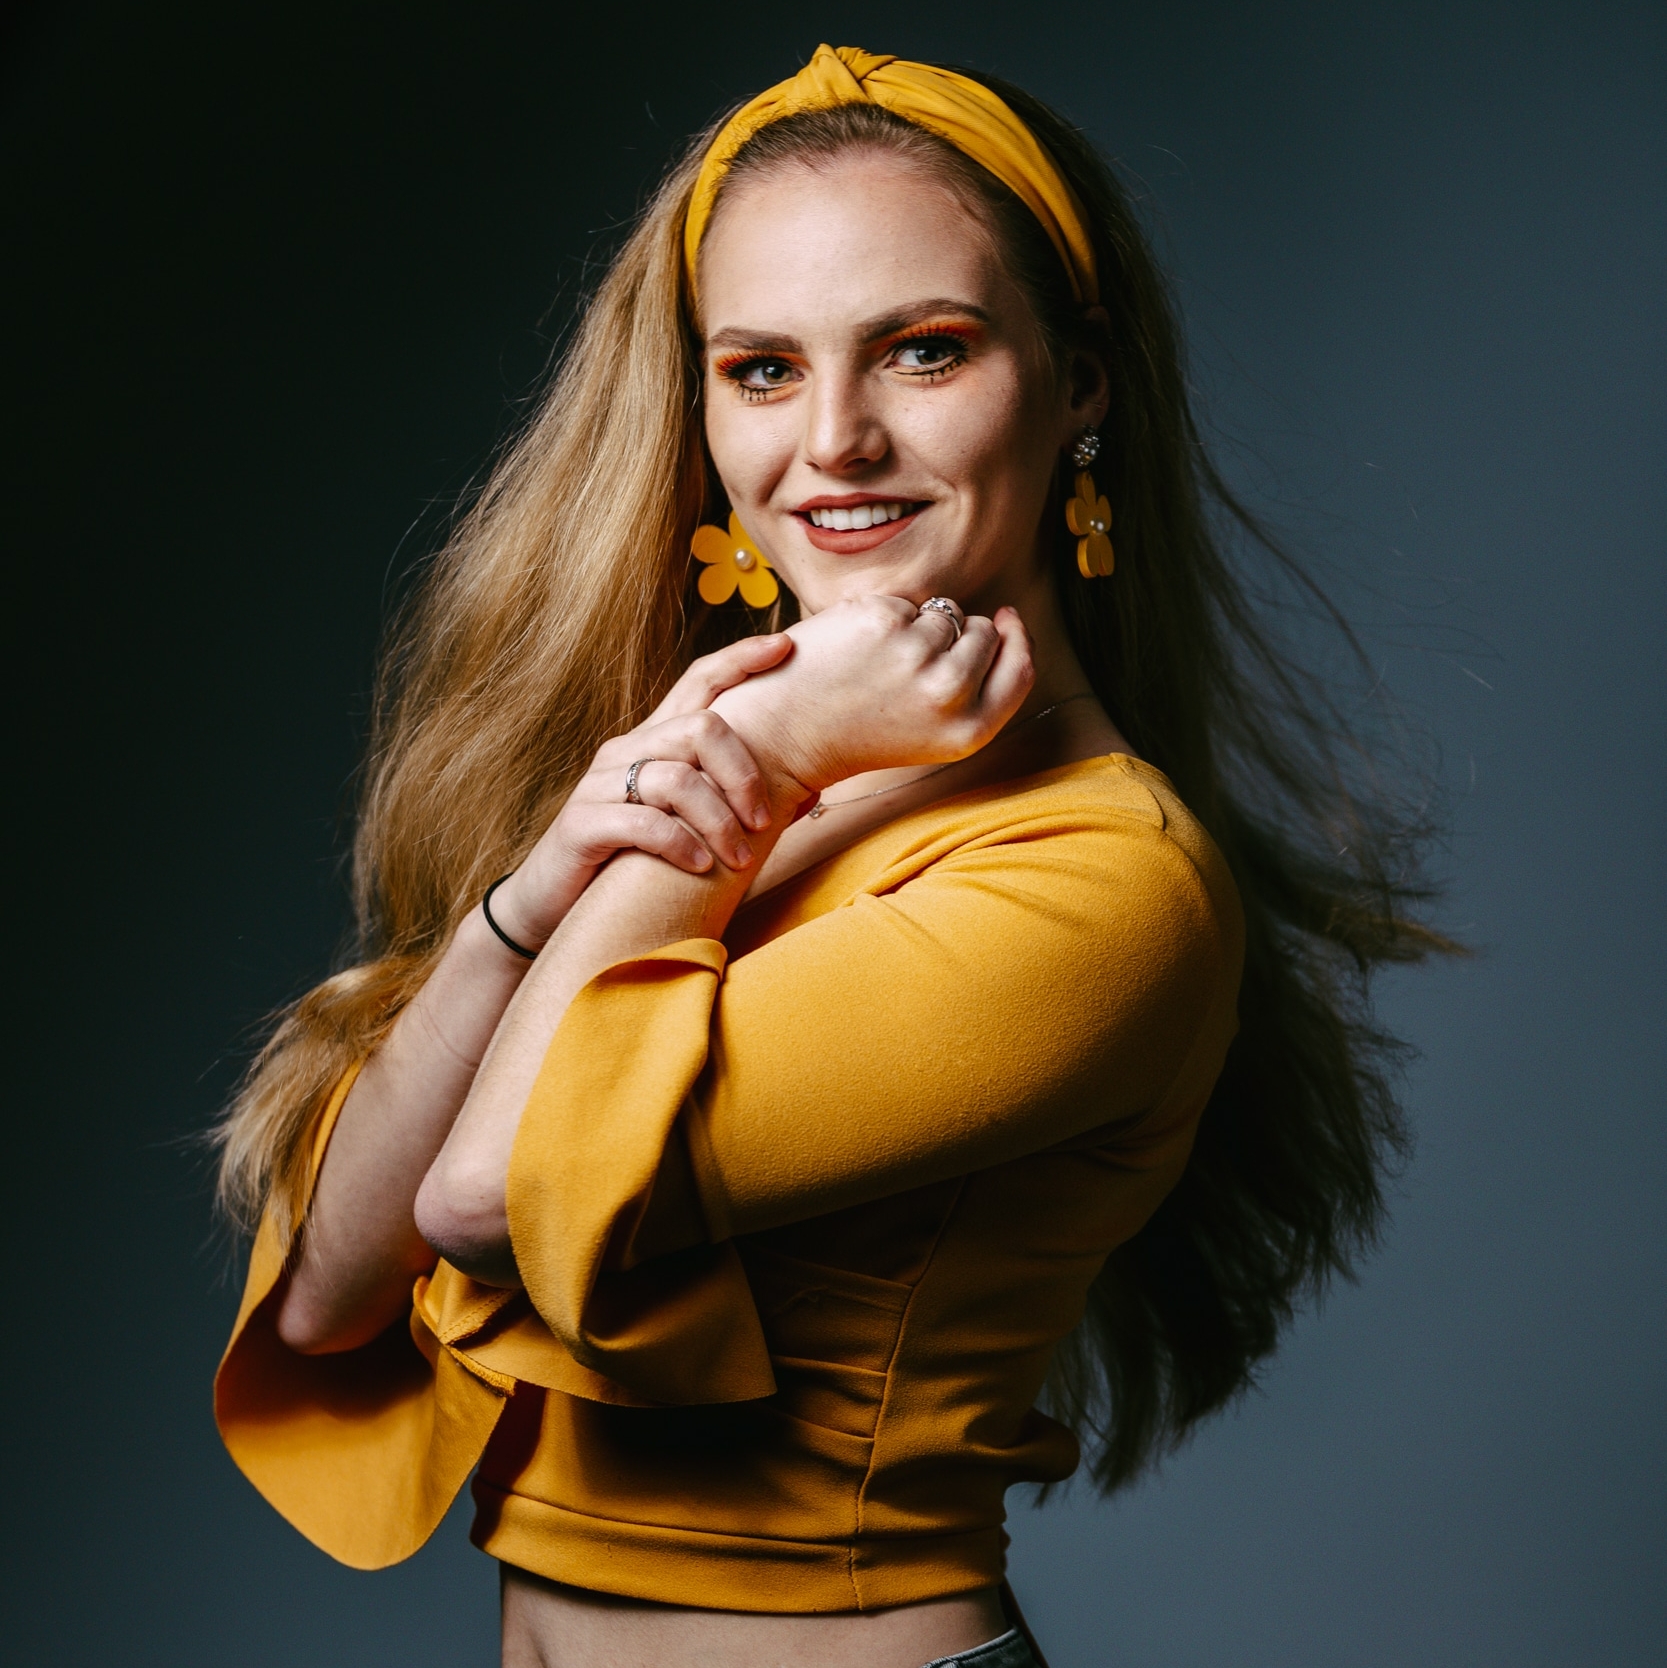 A young professional portrait photographer capturing a woman in a vibrant yellow top for a photo shoot.